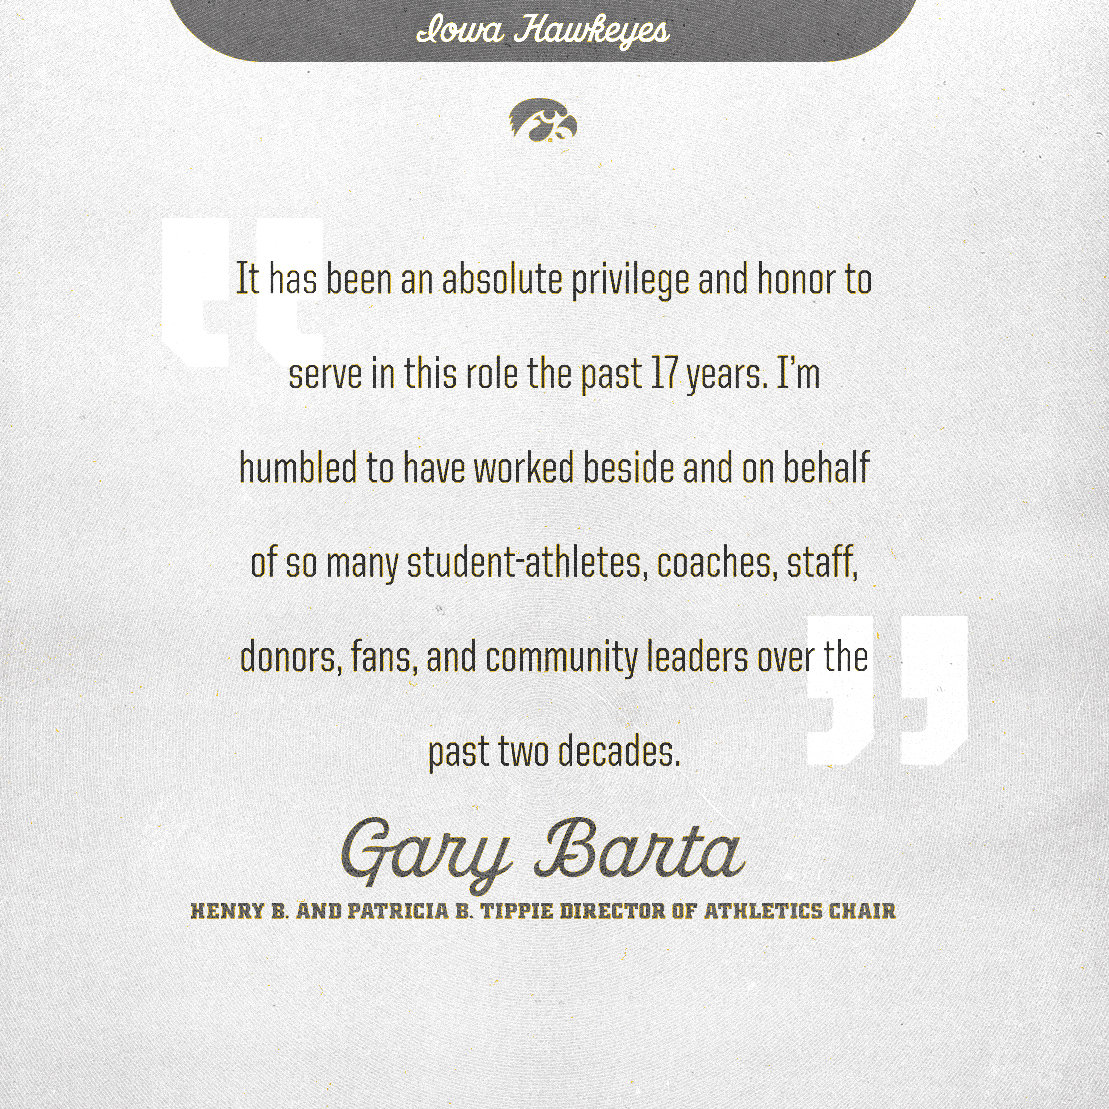 Quote from Barta: It has been an absolute privilege and honor to serve in this role for the past 17 years. I'm humbled to have worked beside and on behalf of so many student-athletes, coaches, staff, donors, fans, and community leaders over the past two decades.